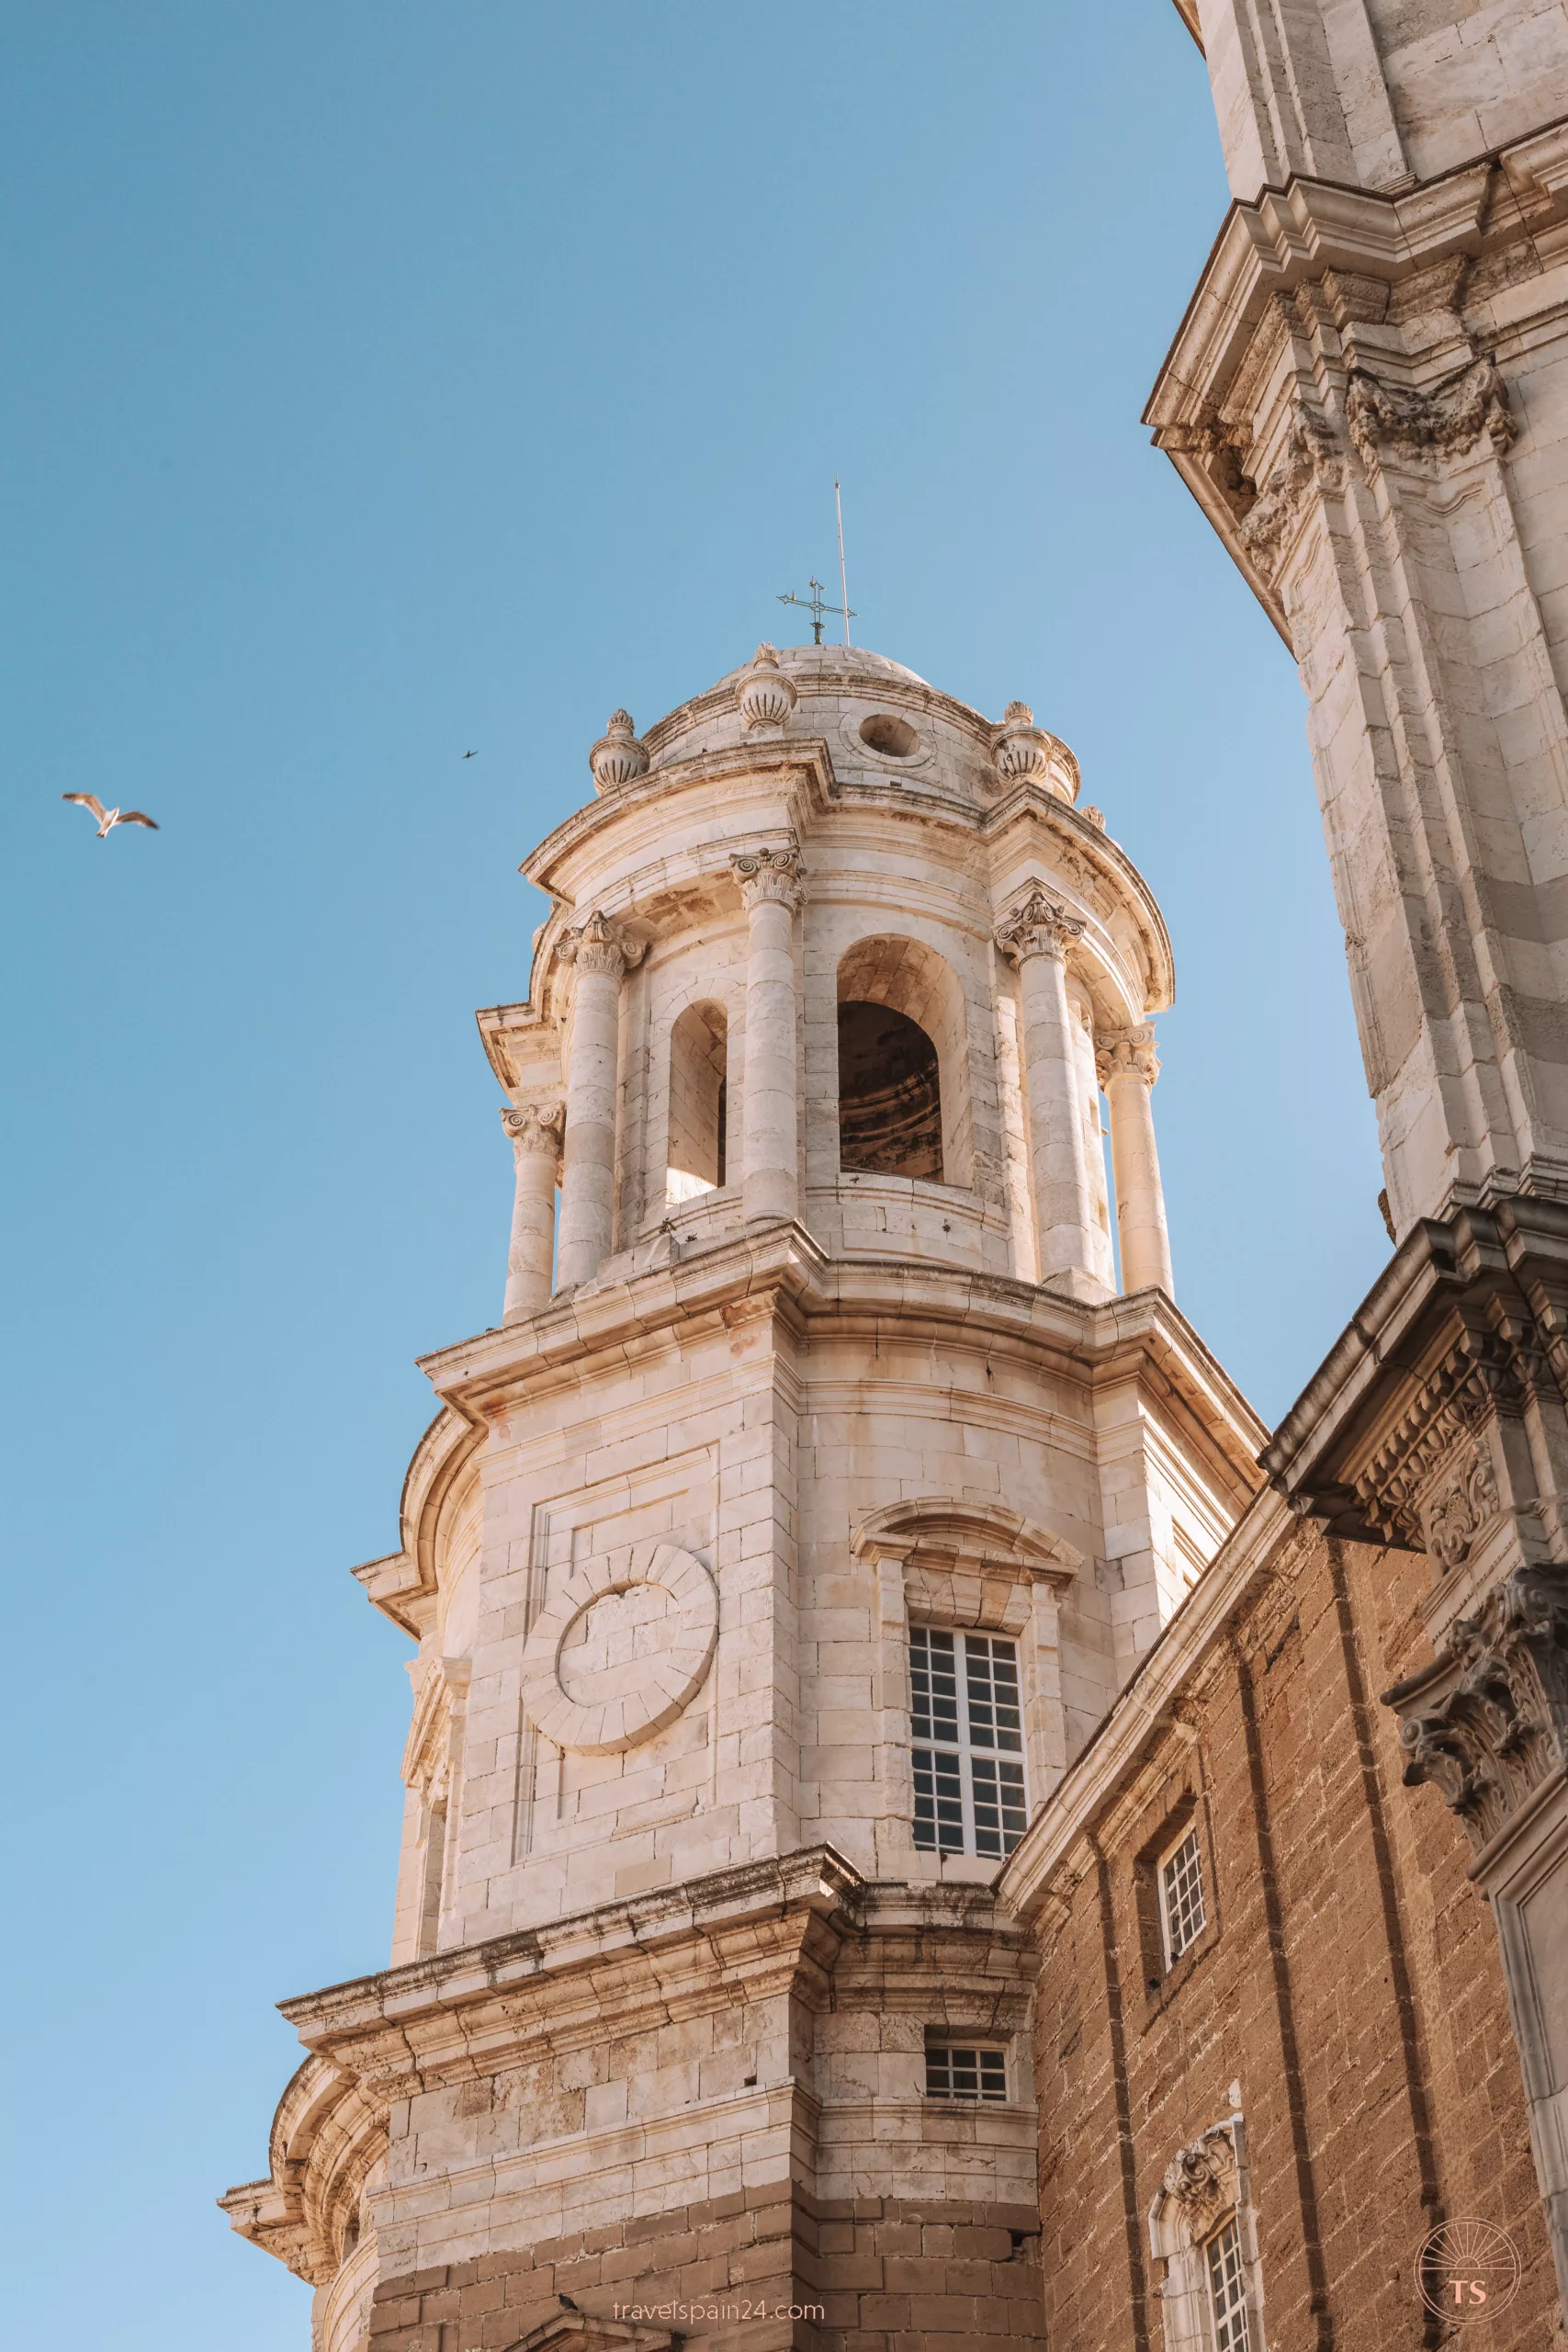 Close-up of one of the towers of Cádiz Cathedral, emphasizing the architectural details as part of the Cádiz one-day itinerary